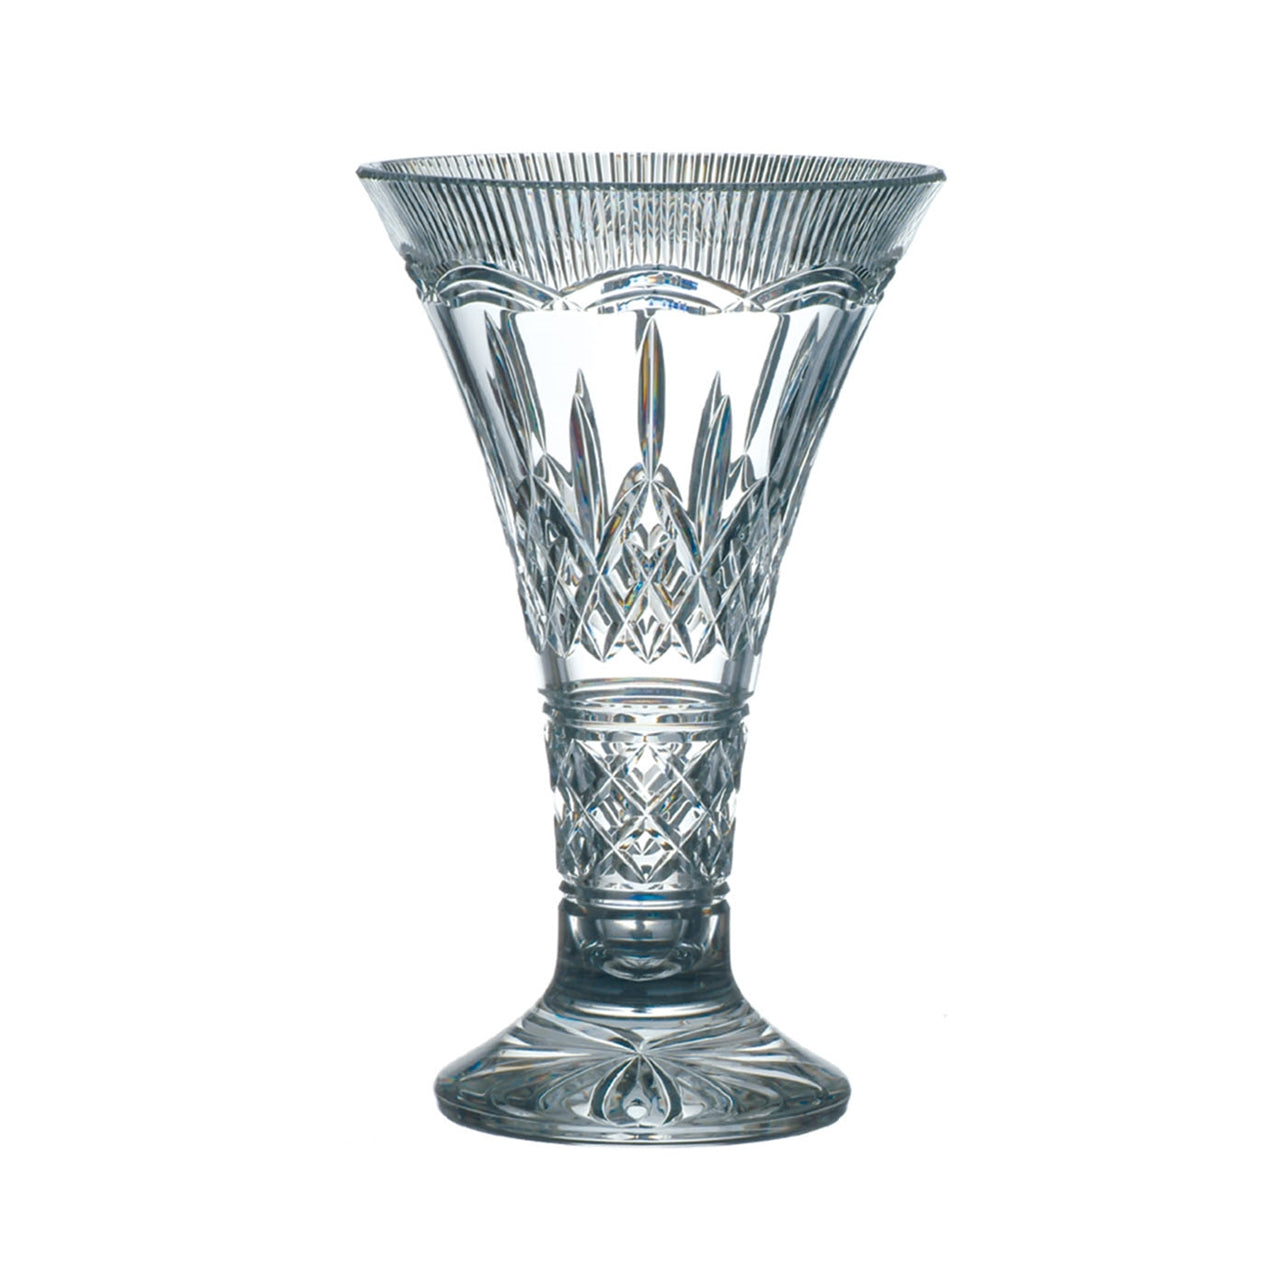 Lismore 35cm Statement Vase by Waterford Crystal  Waterford Lismore Statement Vase - The Waterford Lismore pattern is a stunning combination of brilliance and clarity. You can't improve on nature, but you can come close with the Lismore Statement Vase. Accentuate the beauty of roses, floral arrangements and cut flowers with this stunning fine crystal vase patterned with Lismore's signature diamond and wedge cuts. 